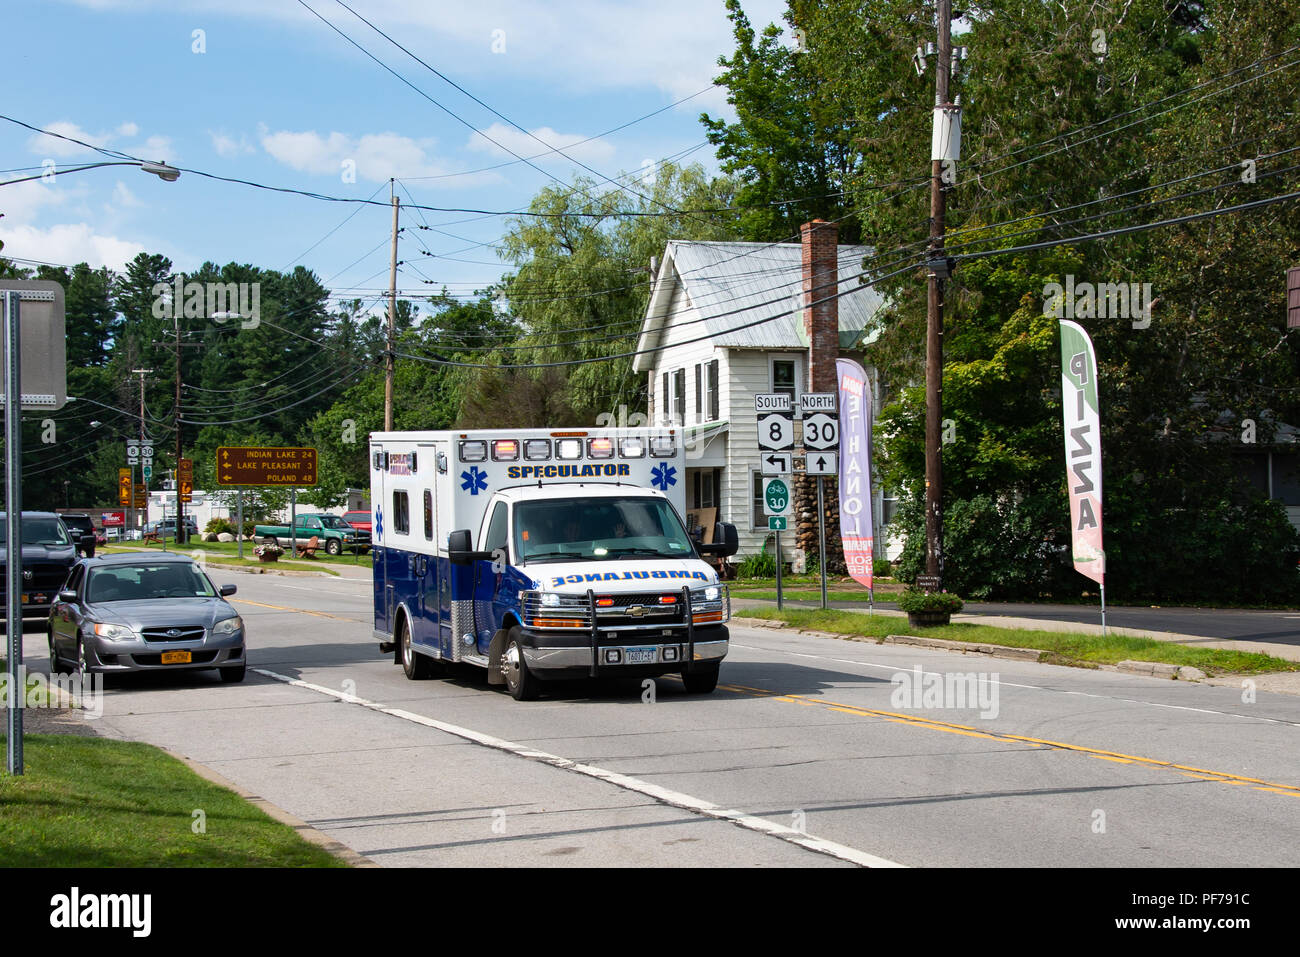 The Speculator ambulance racing through Speculator, NY USA responding to an emergency with lights flashing. Stock Photo